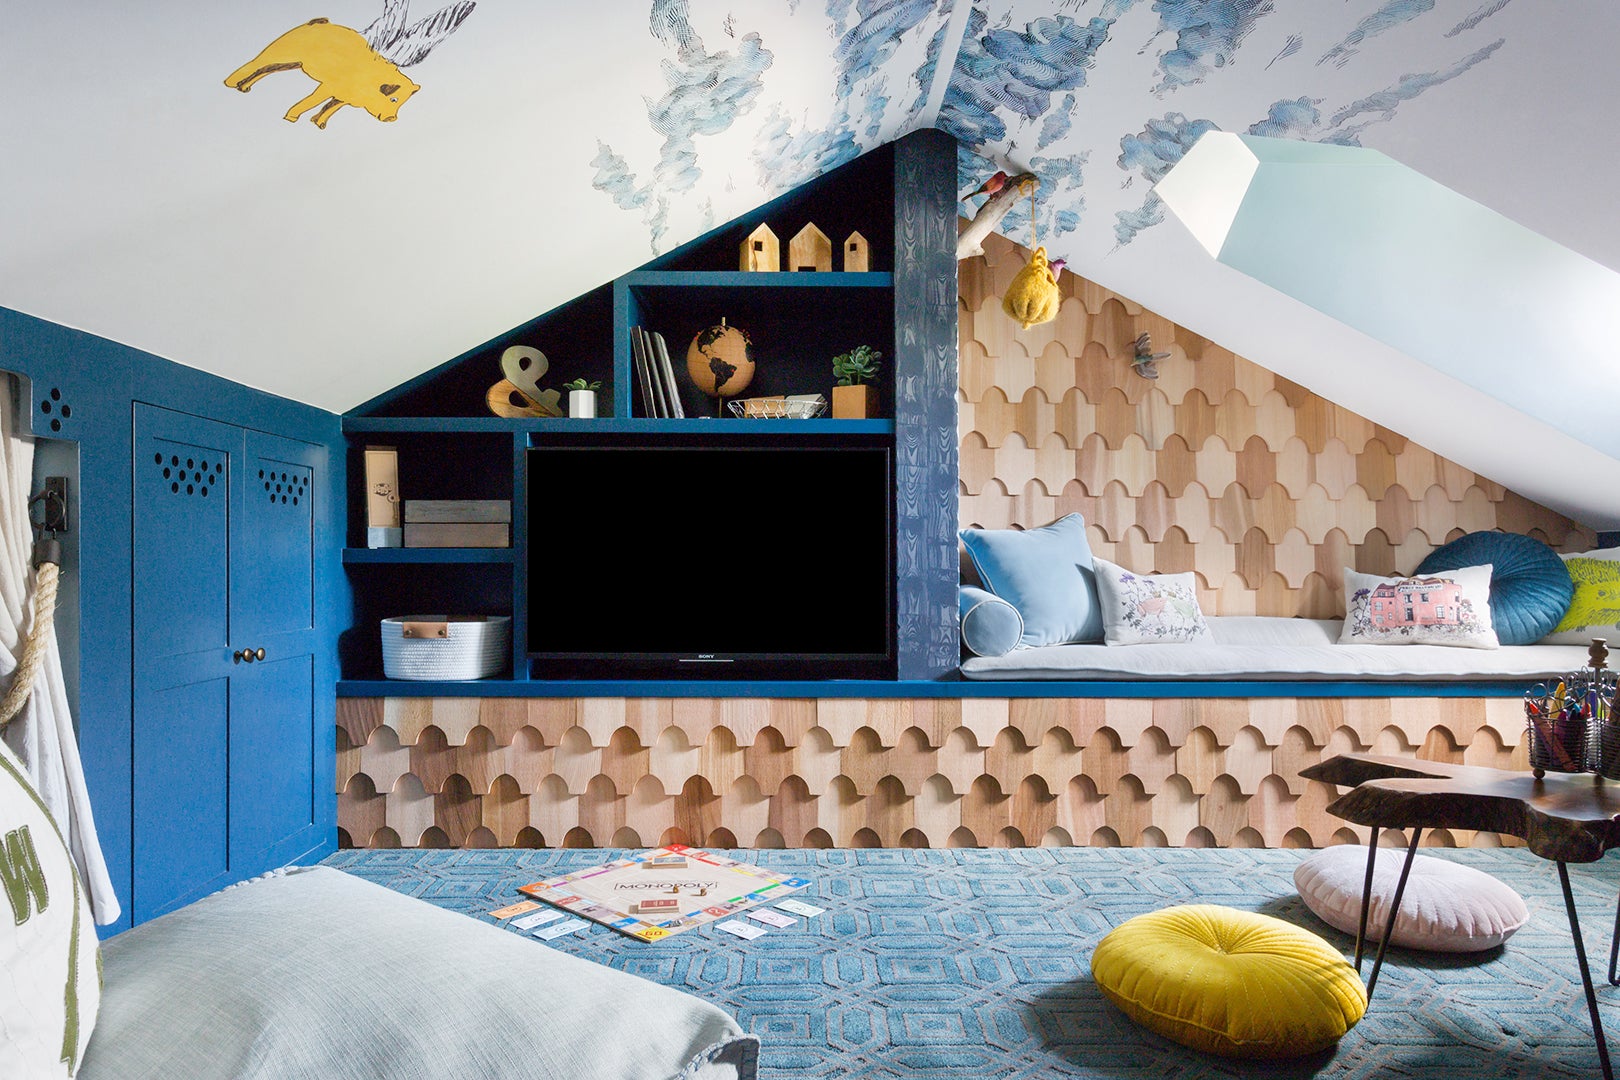 Kids room with wooden shingles to look like a treehouse